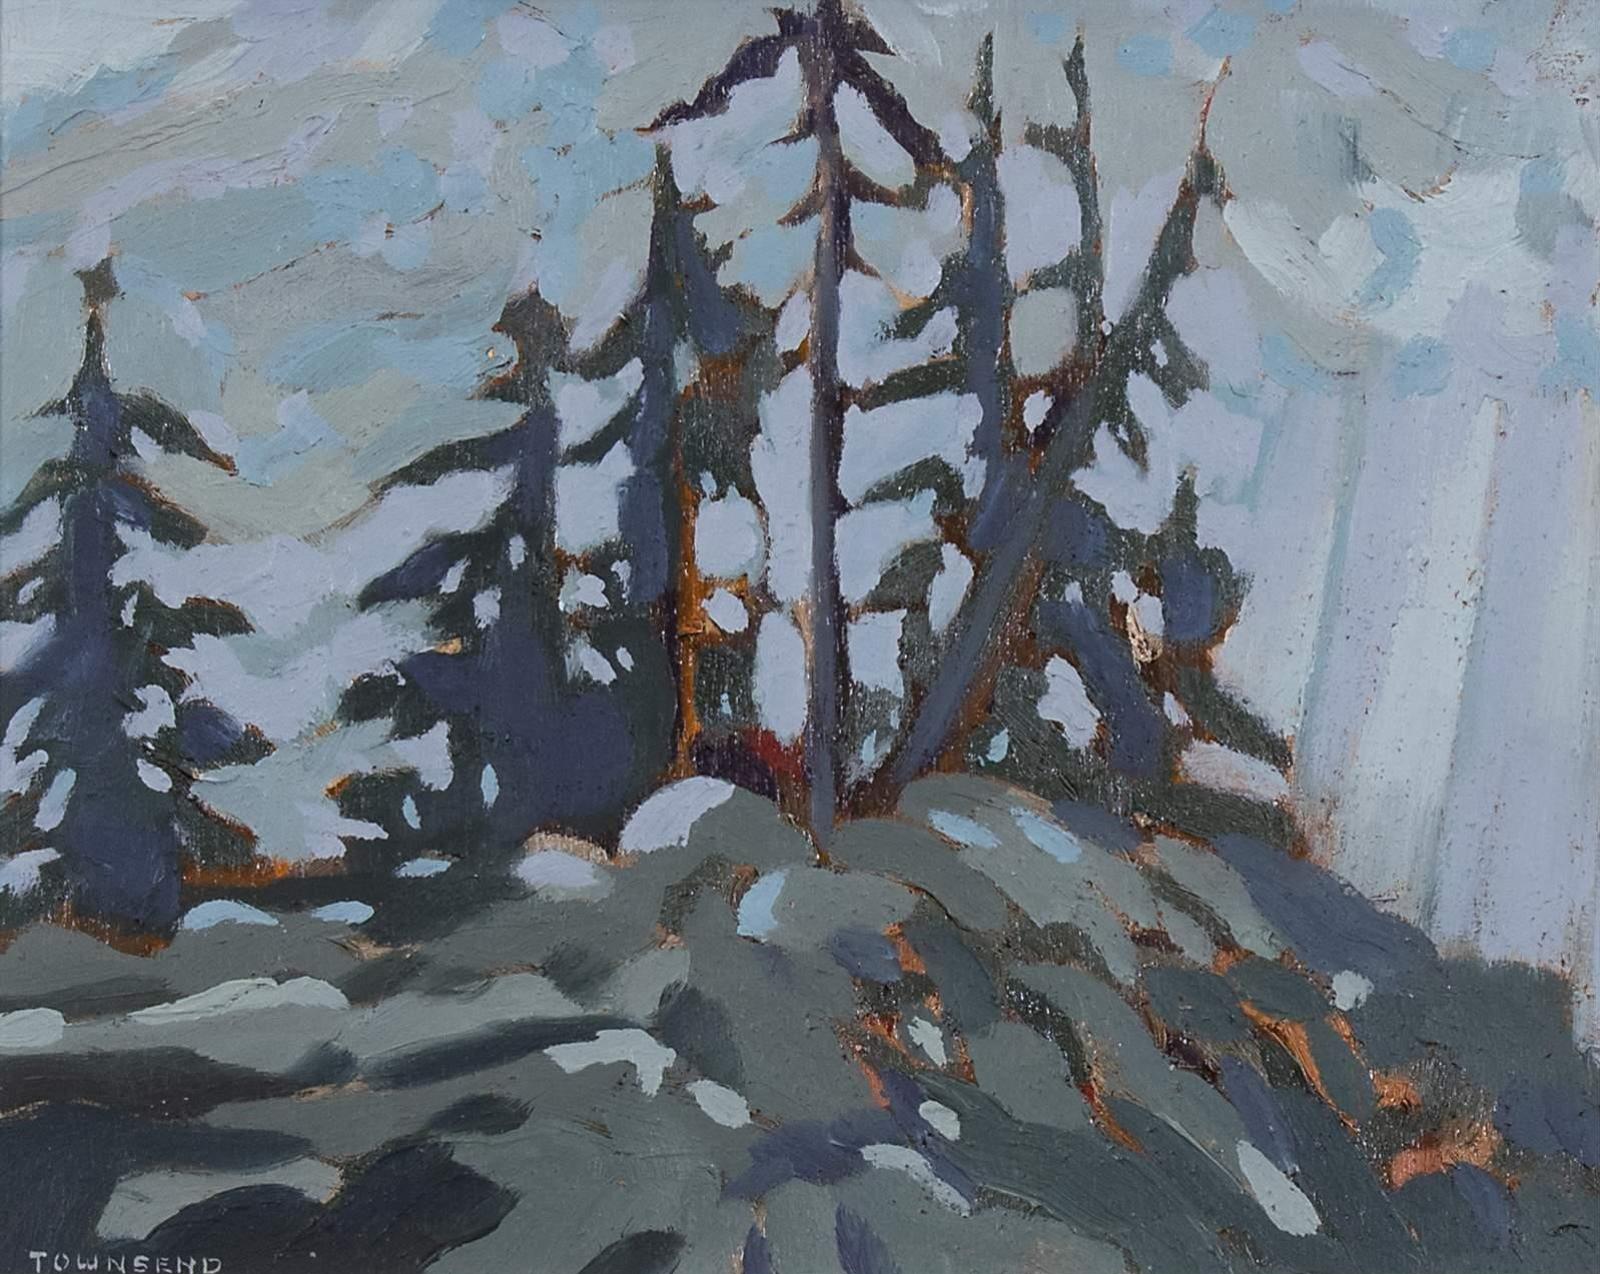 Harold William (Bill) Townsend (1940) - On Top Of The Mountain Near Squamish, B.C